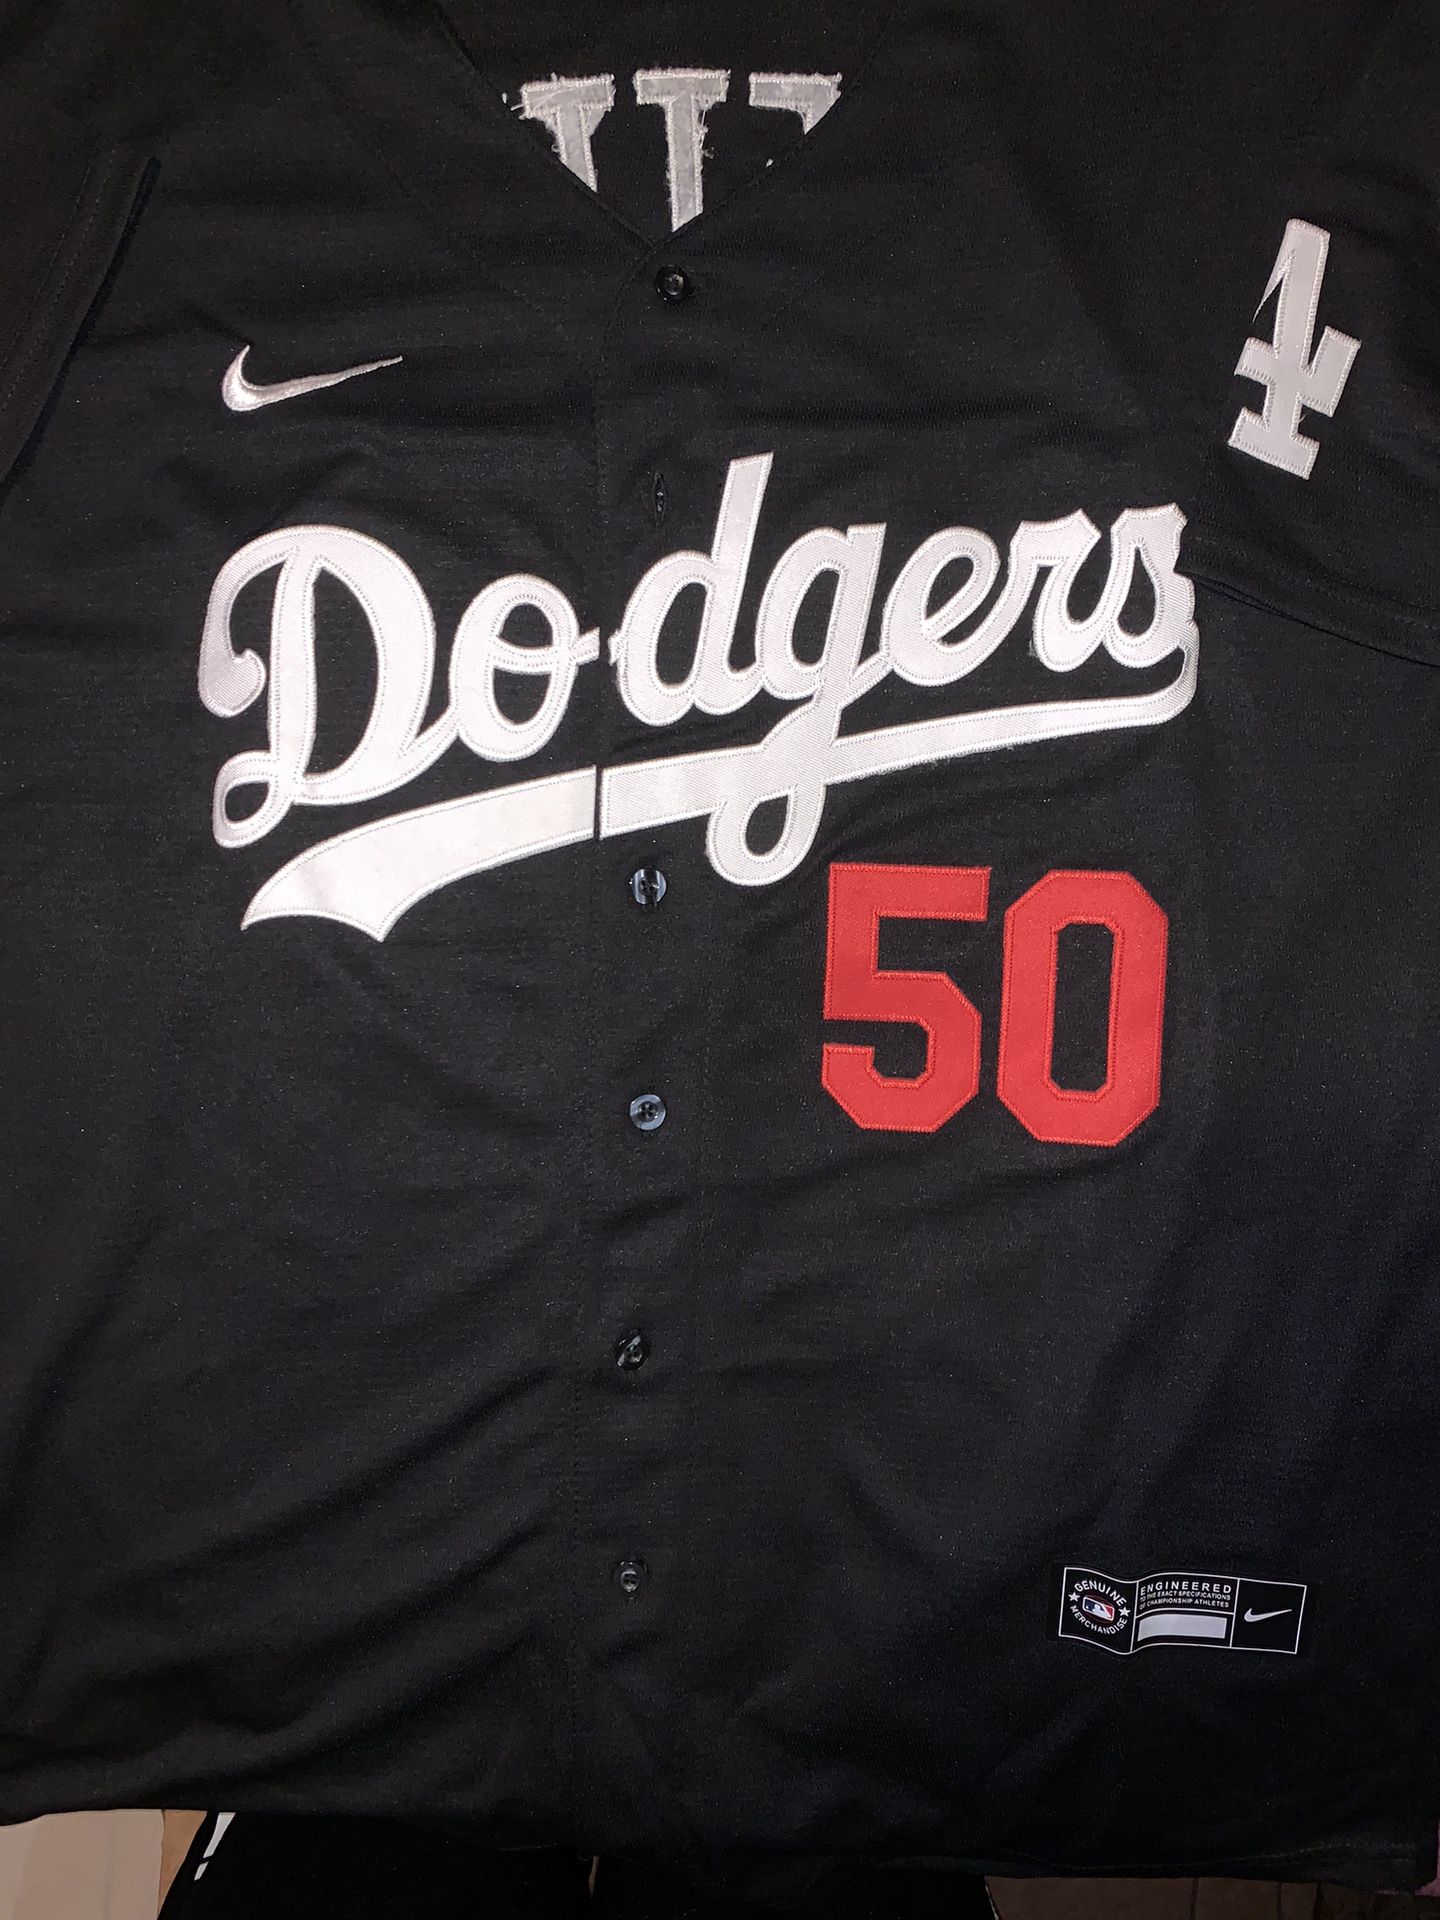 Betts Black Dodgers Jersey for Sale in Los Angeles, CA - OfferUp